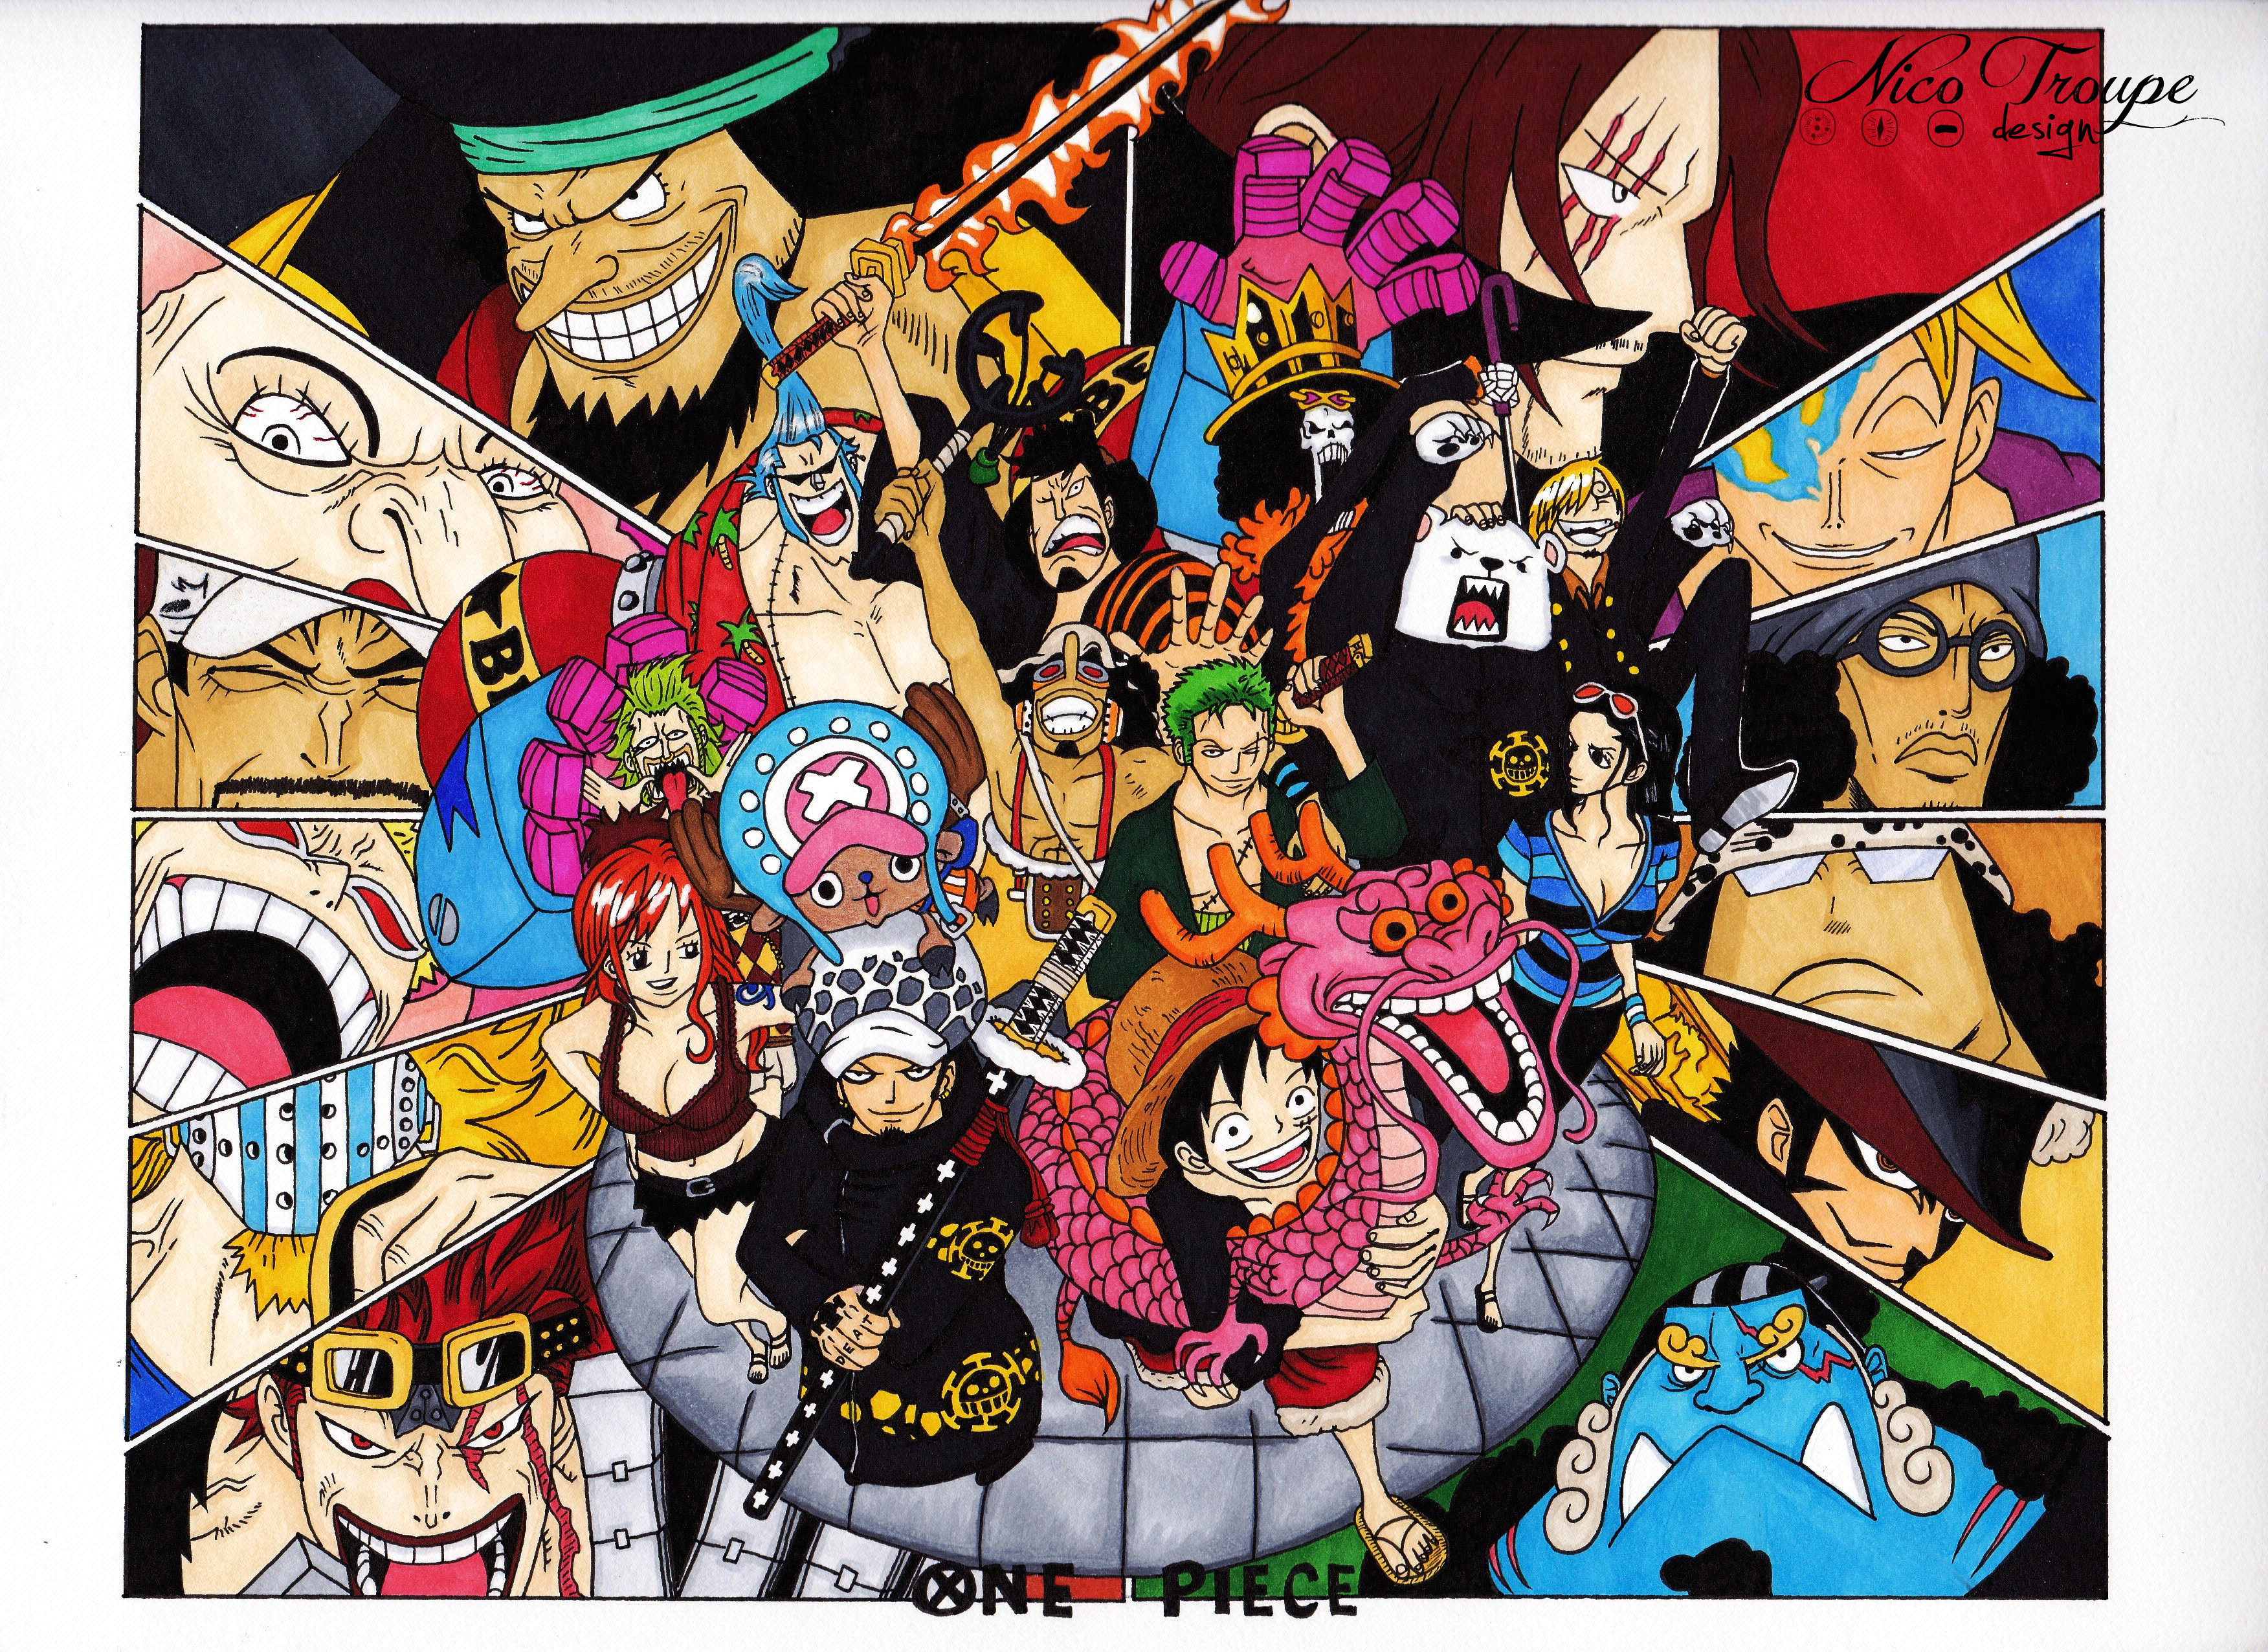 What is the New World in One Piece?